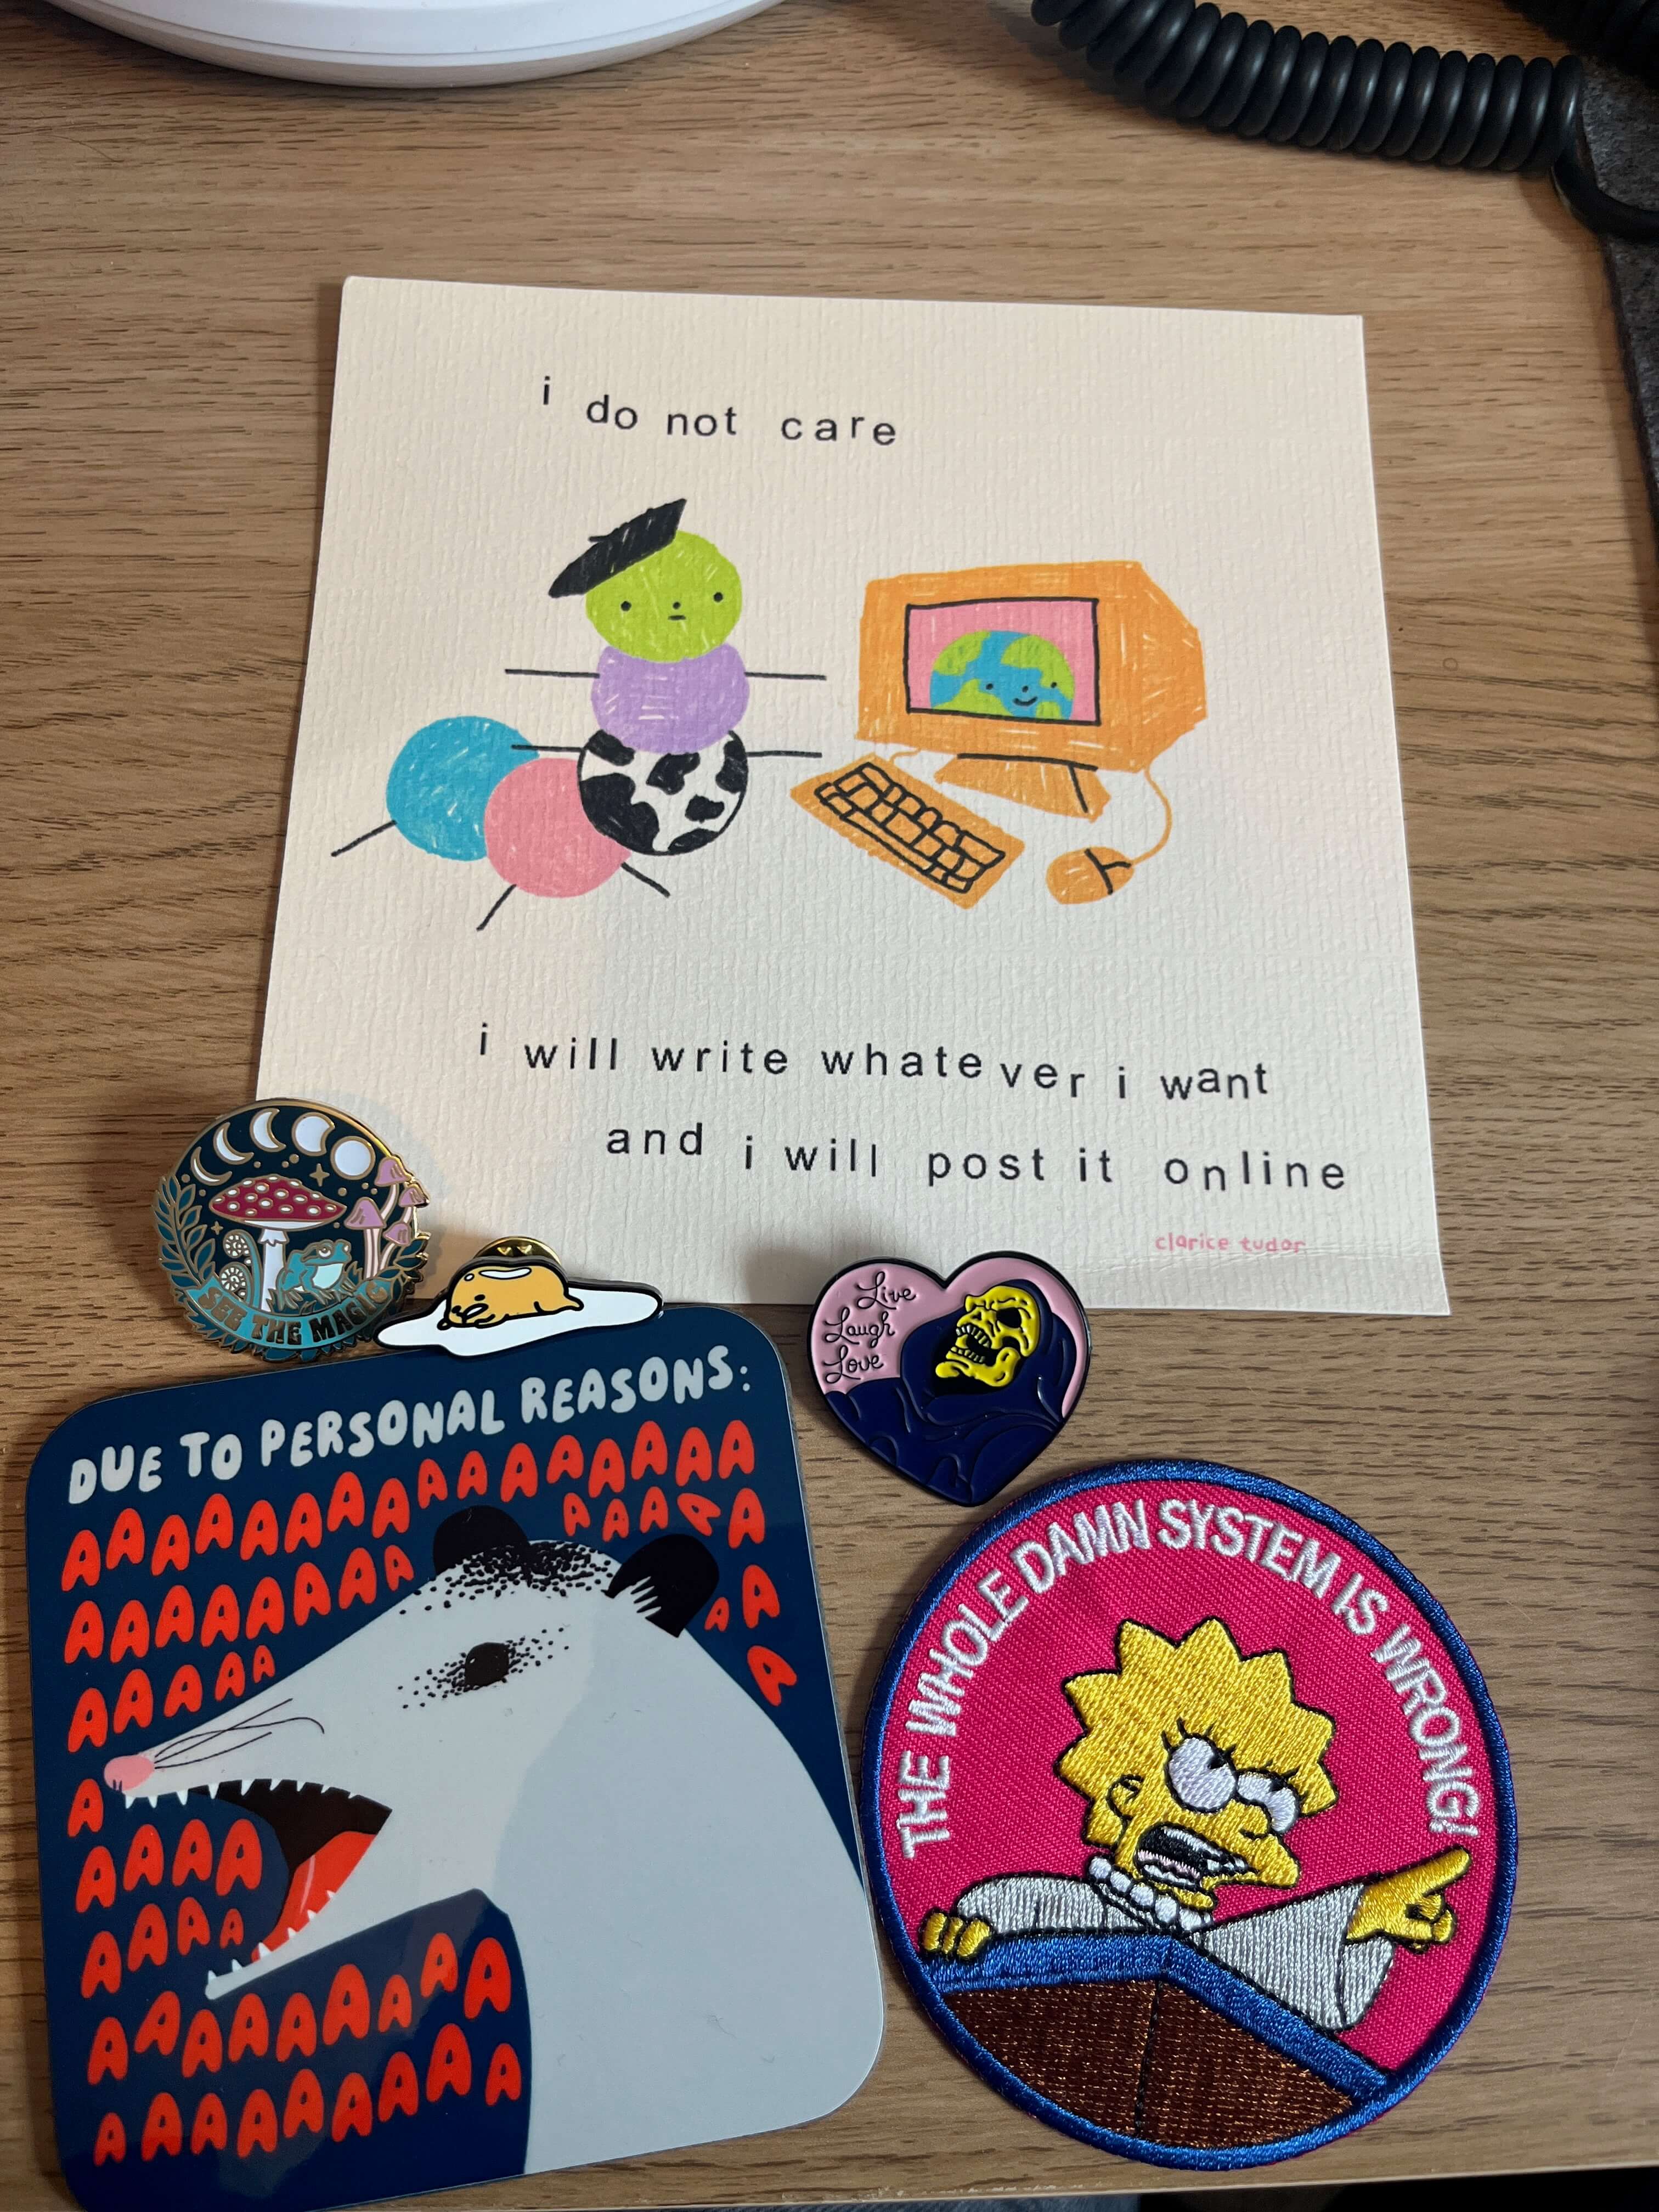 A collection of new purchases on a desk: a coaster featuring an opossum that says 'Due to personal reasons aaaaaaaaaaaaaaa'; an iron-on patch featuring Lisa Simpson pointing and saying 'The whole damn system is wrong!'; a pin badge of Gudetama being lazy and lying down; a heart-shaped pin badge featuring Skeletor that says 'Live Laugh Love'; a pin badge with a toadstool, a frog, and phases of the moon that says 'see the magic'; and a square print of a caterpillar wearing a beret in front of a computer with the caption 'I do not care, I will write whatever I want and post it online'.